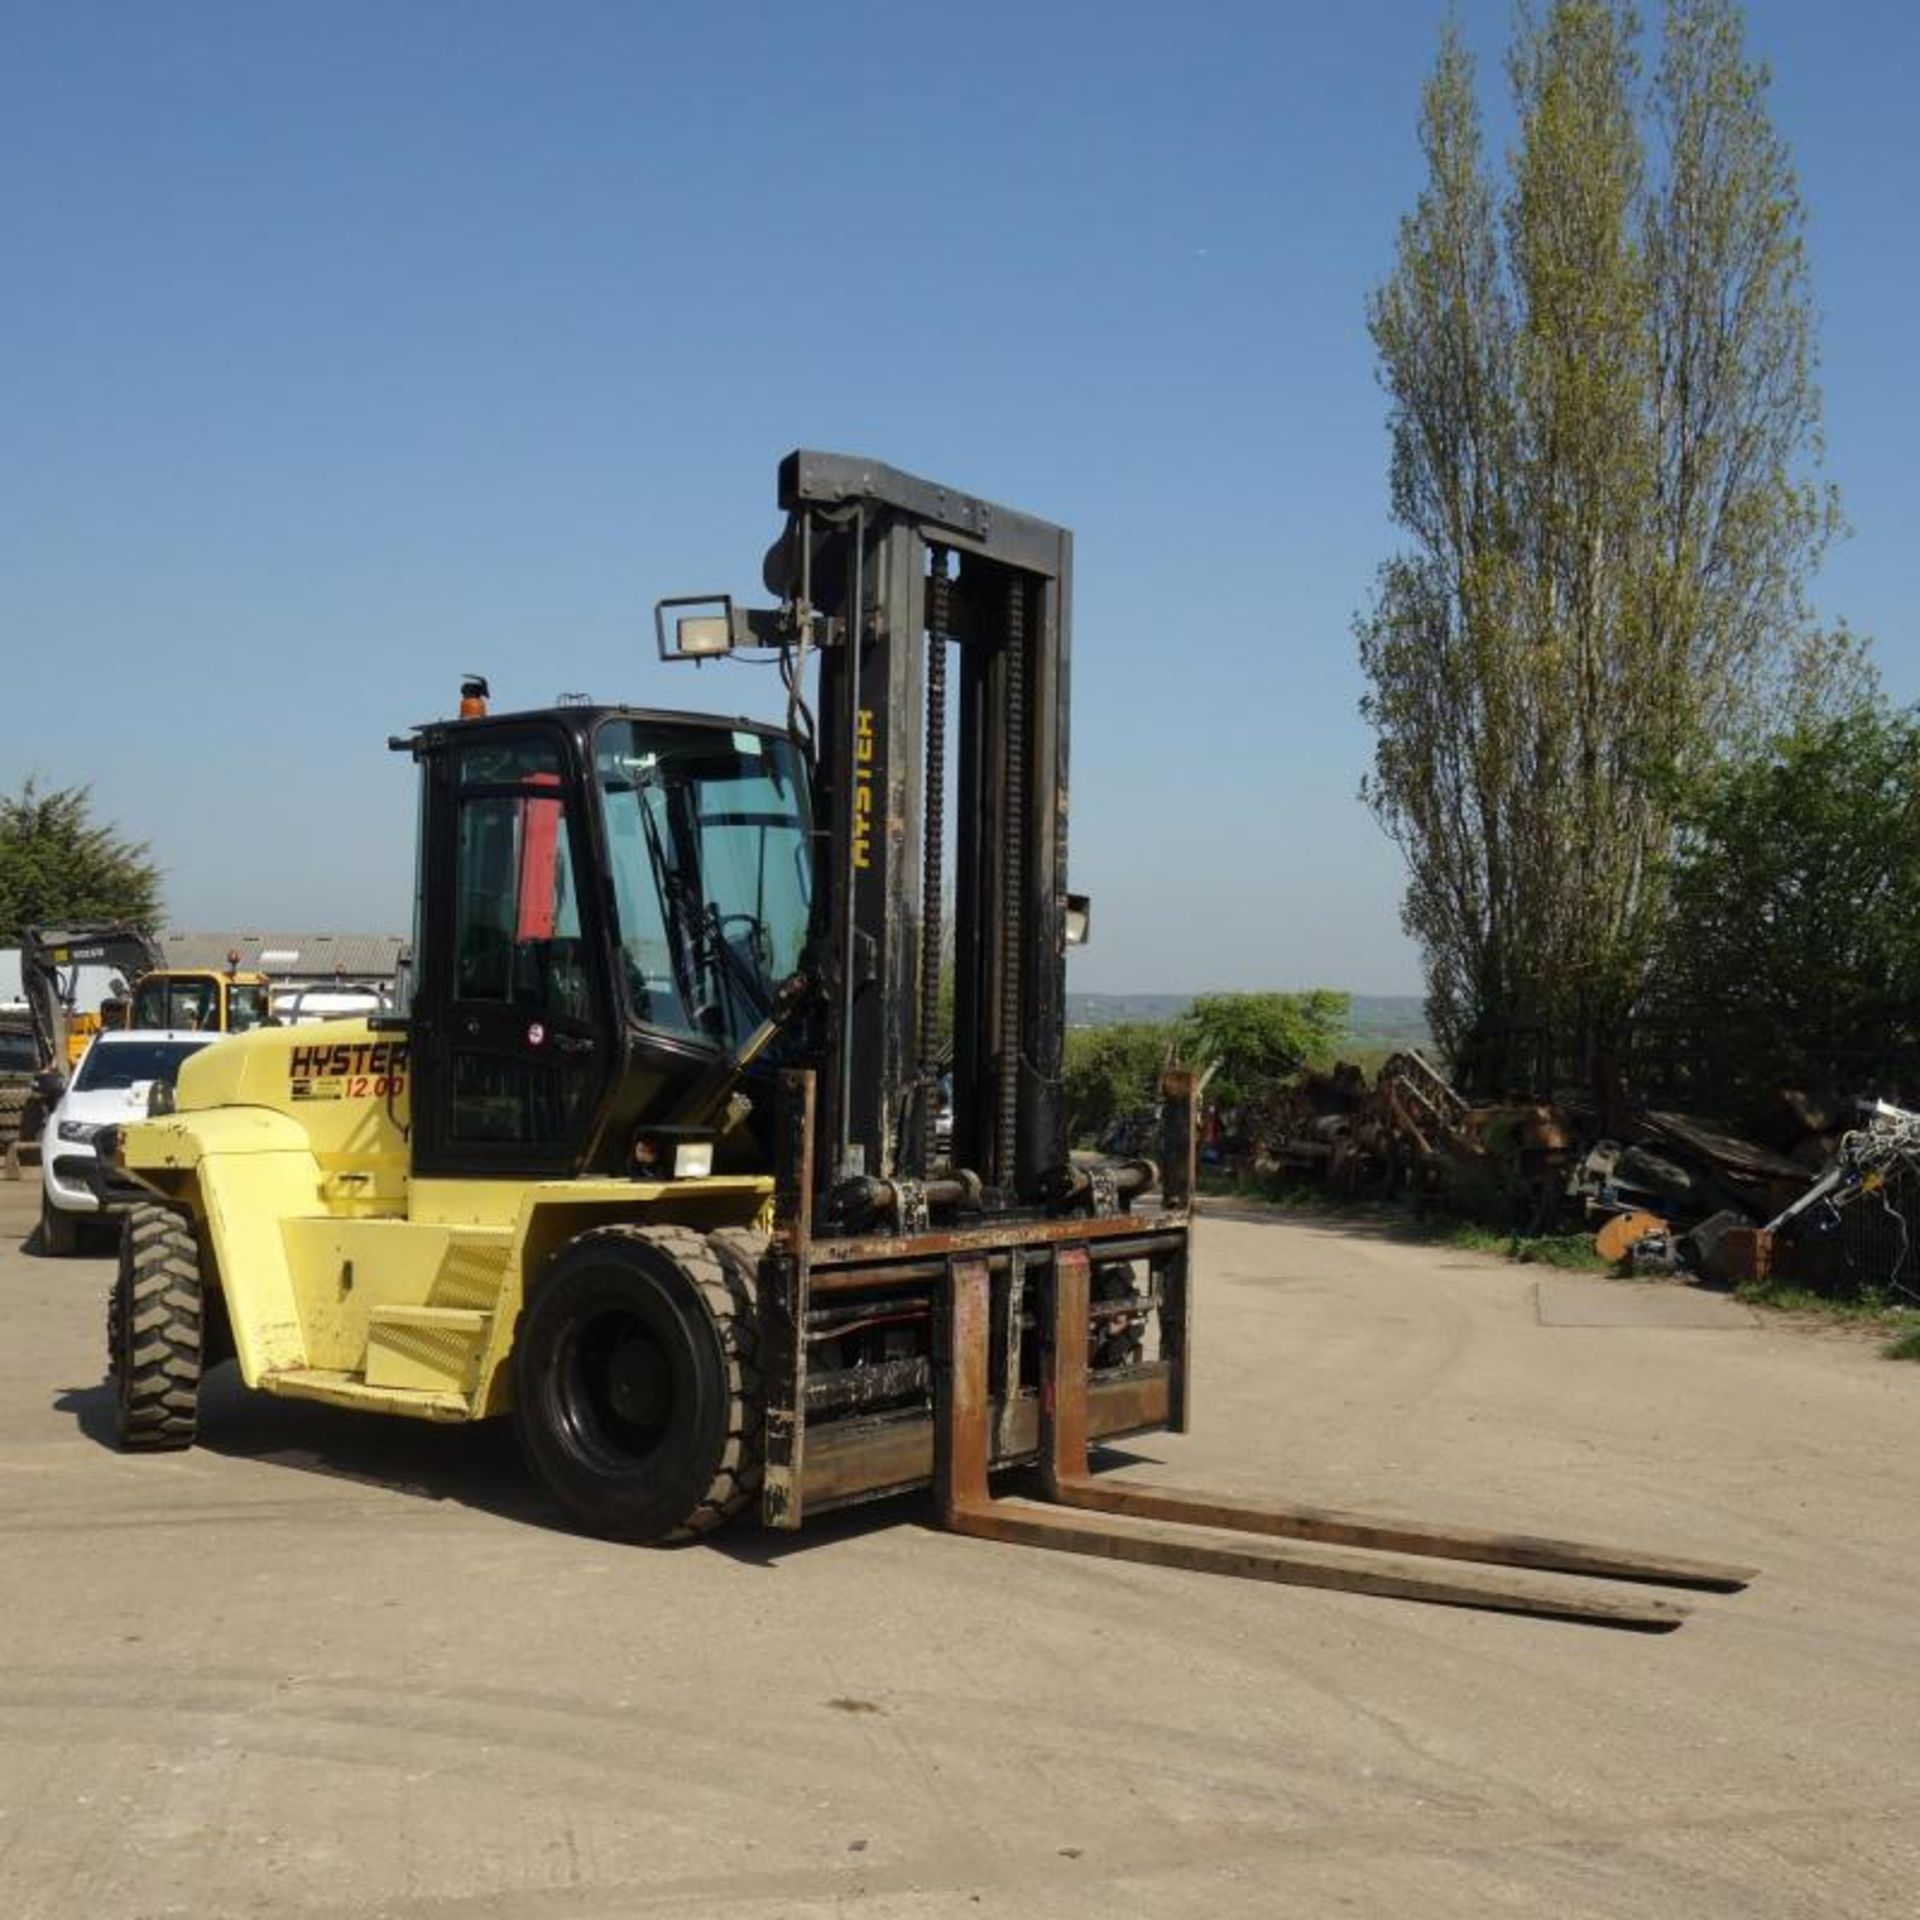 2006 Hyster M12.00xm 12 Ton Forklift, 8151 Hours From New - Image 5 of 5